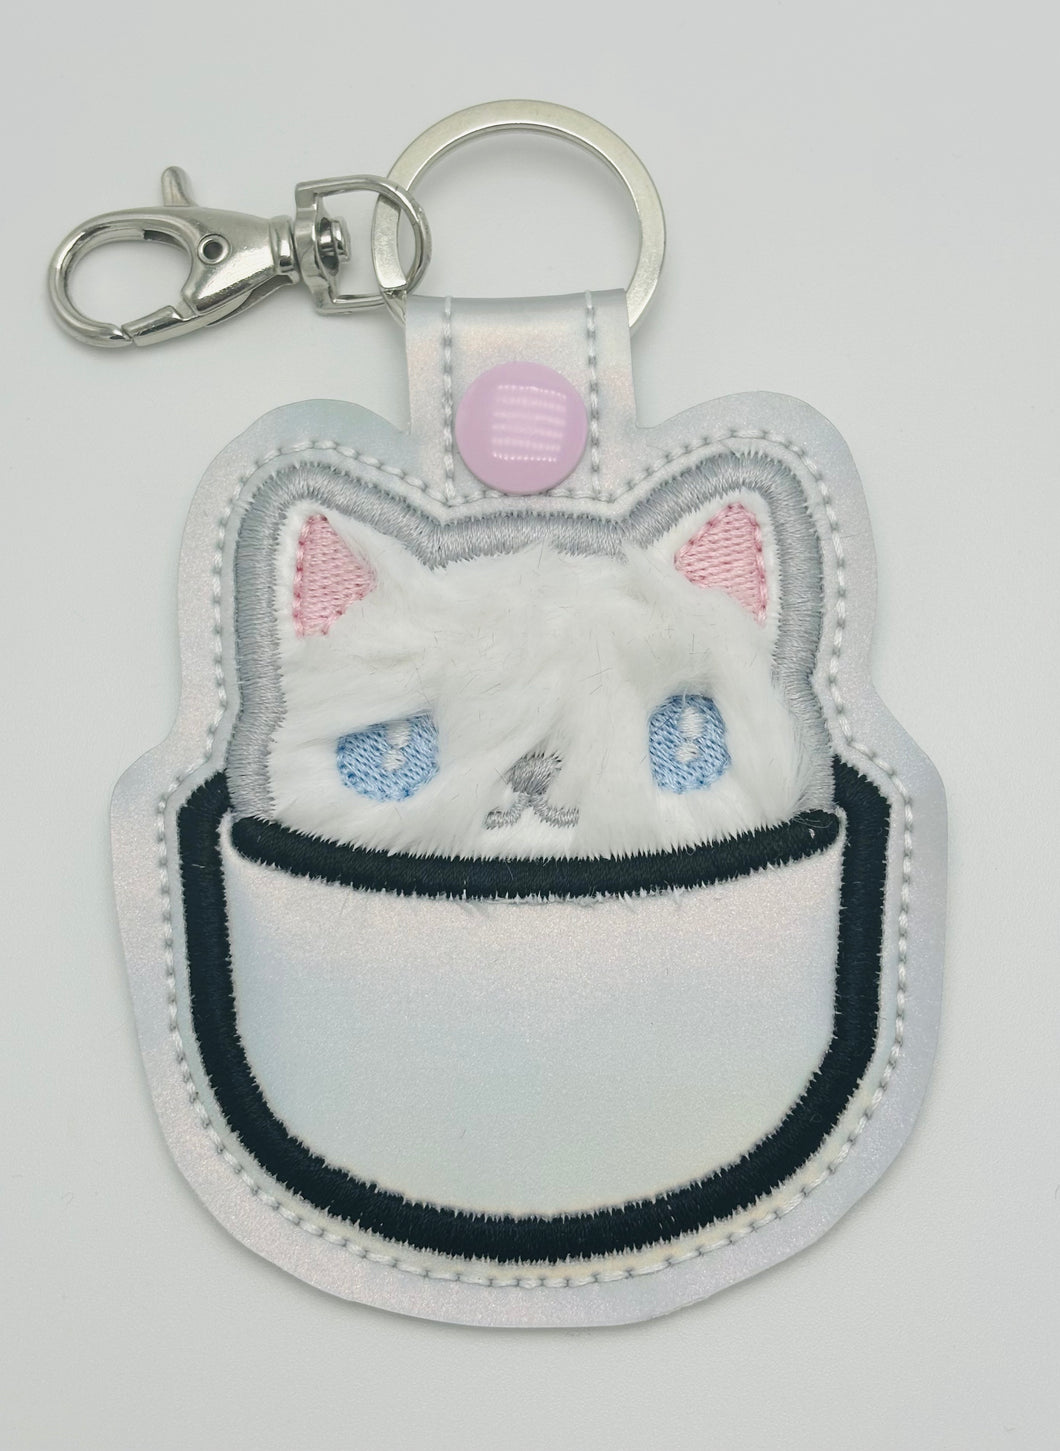 Kitty in a Cup Keychain